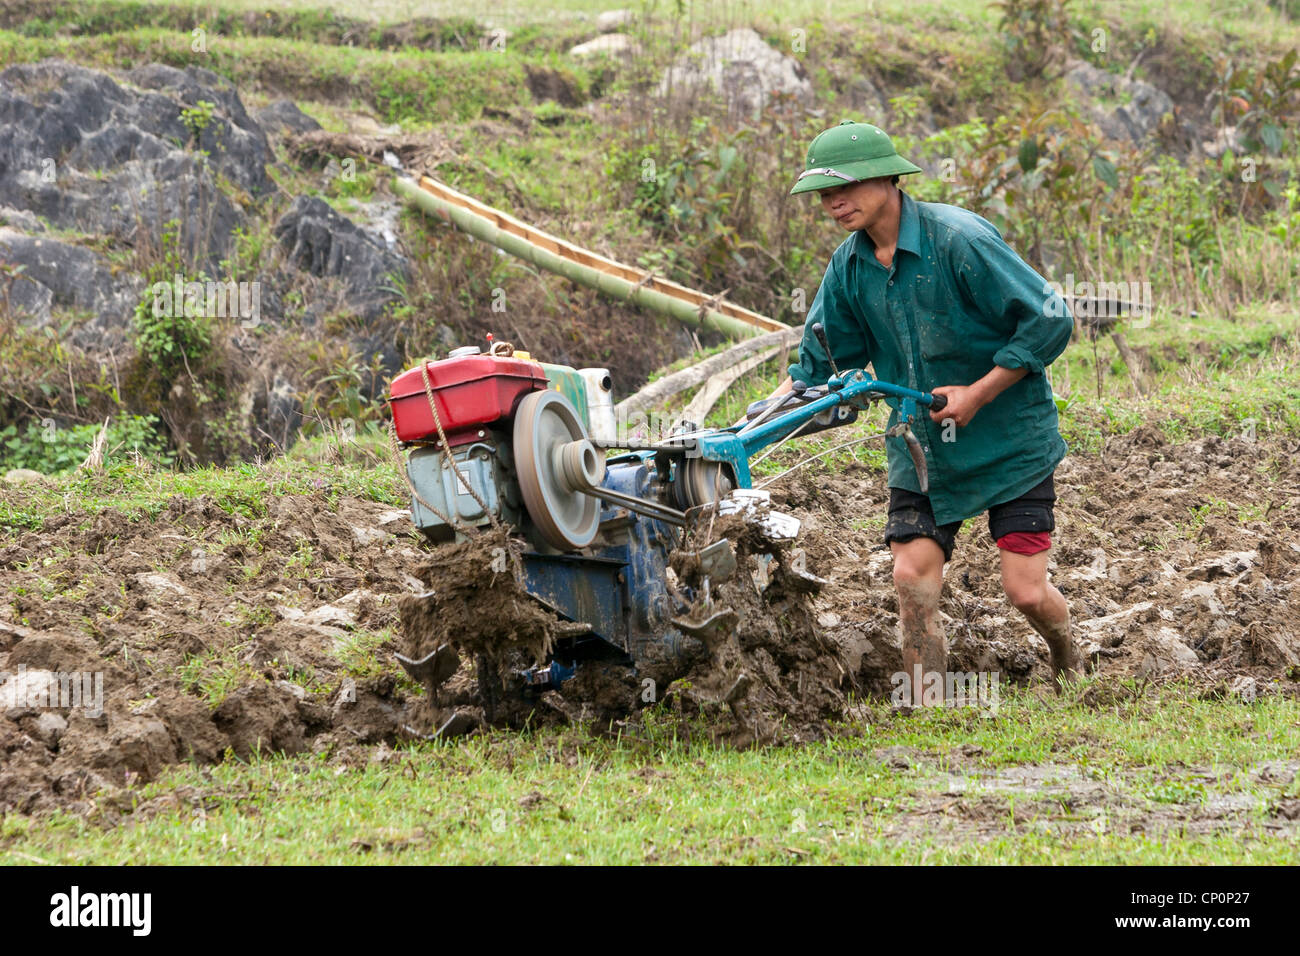 A young farmer tilling his field using a petrol-driven rotary tiller instead of an ox plough. Stock Photo